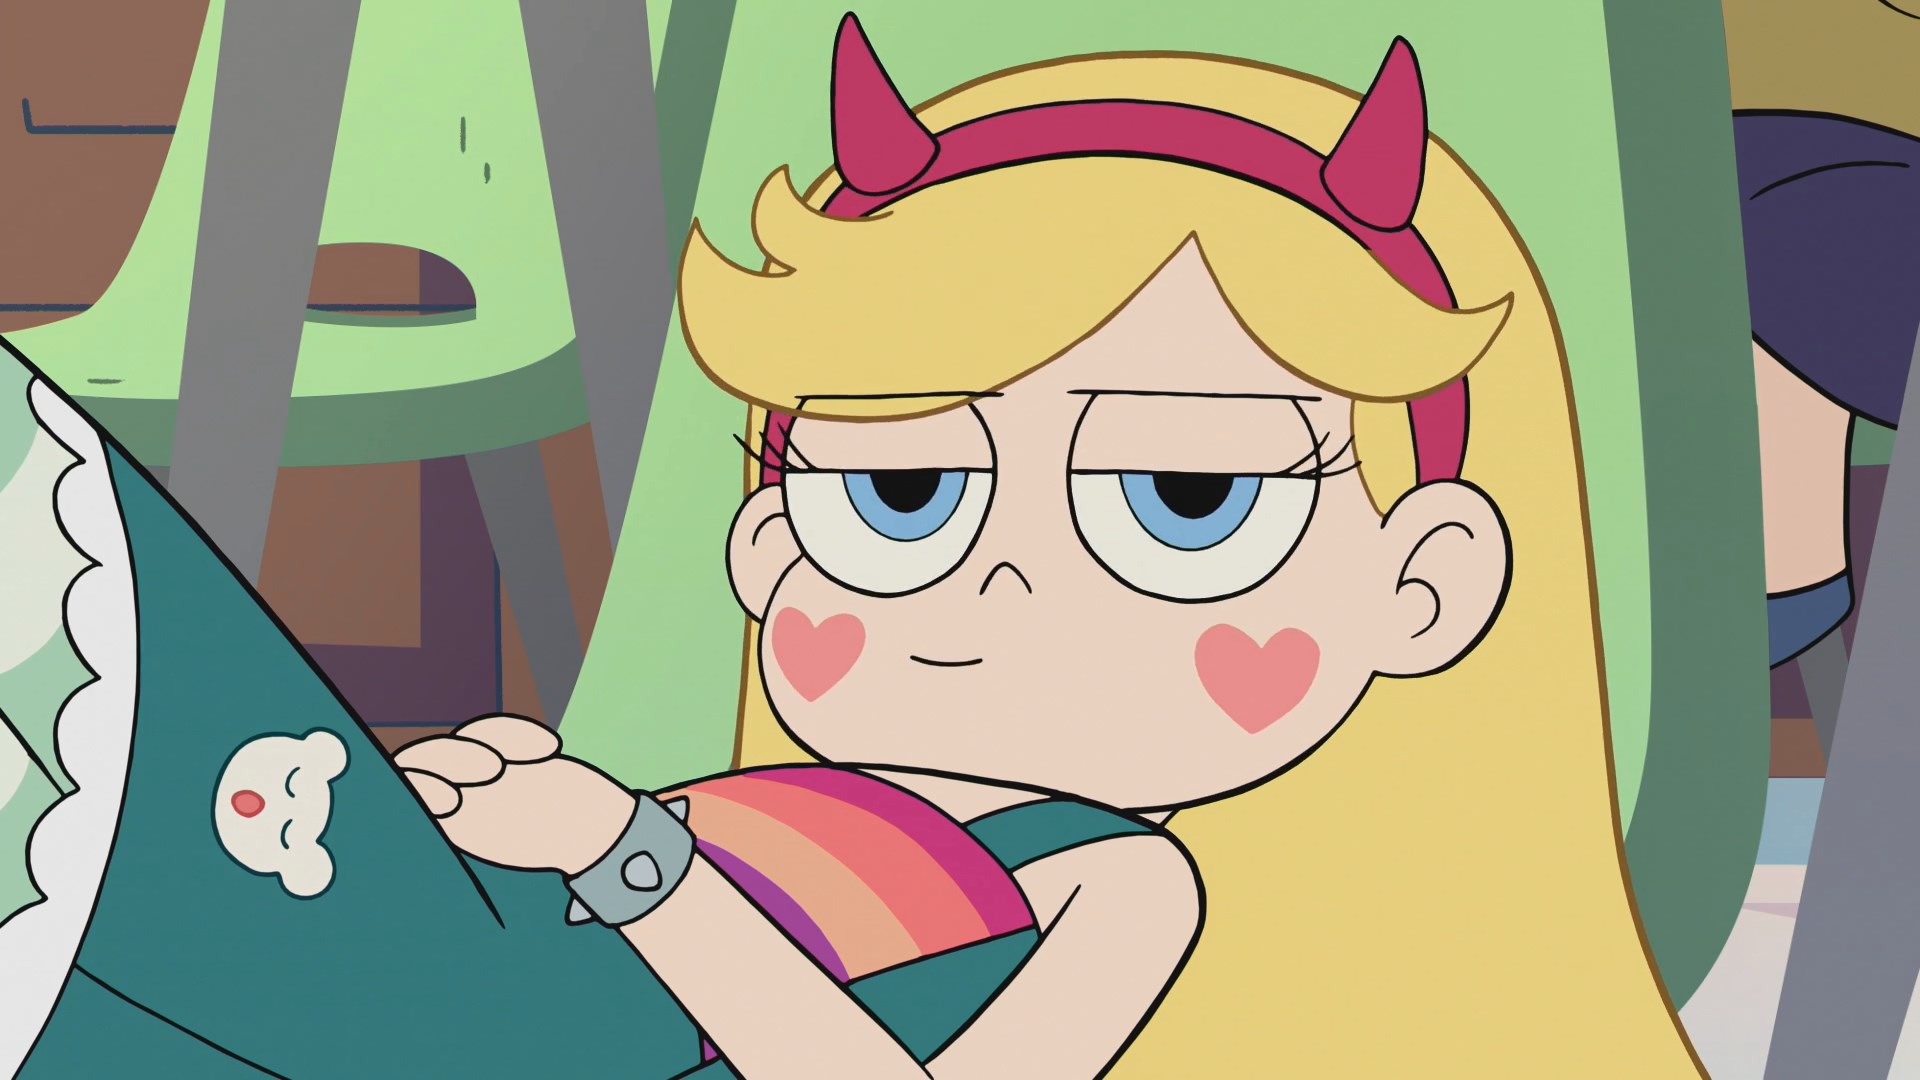 Star vs the Forces of Marco's Harem.